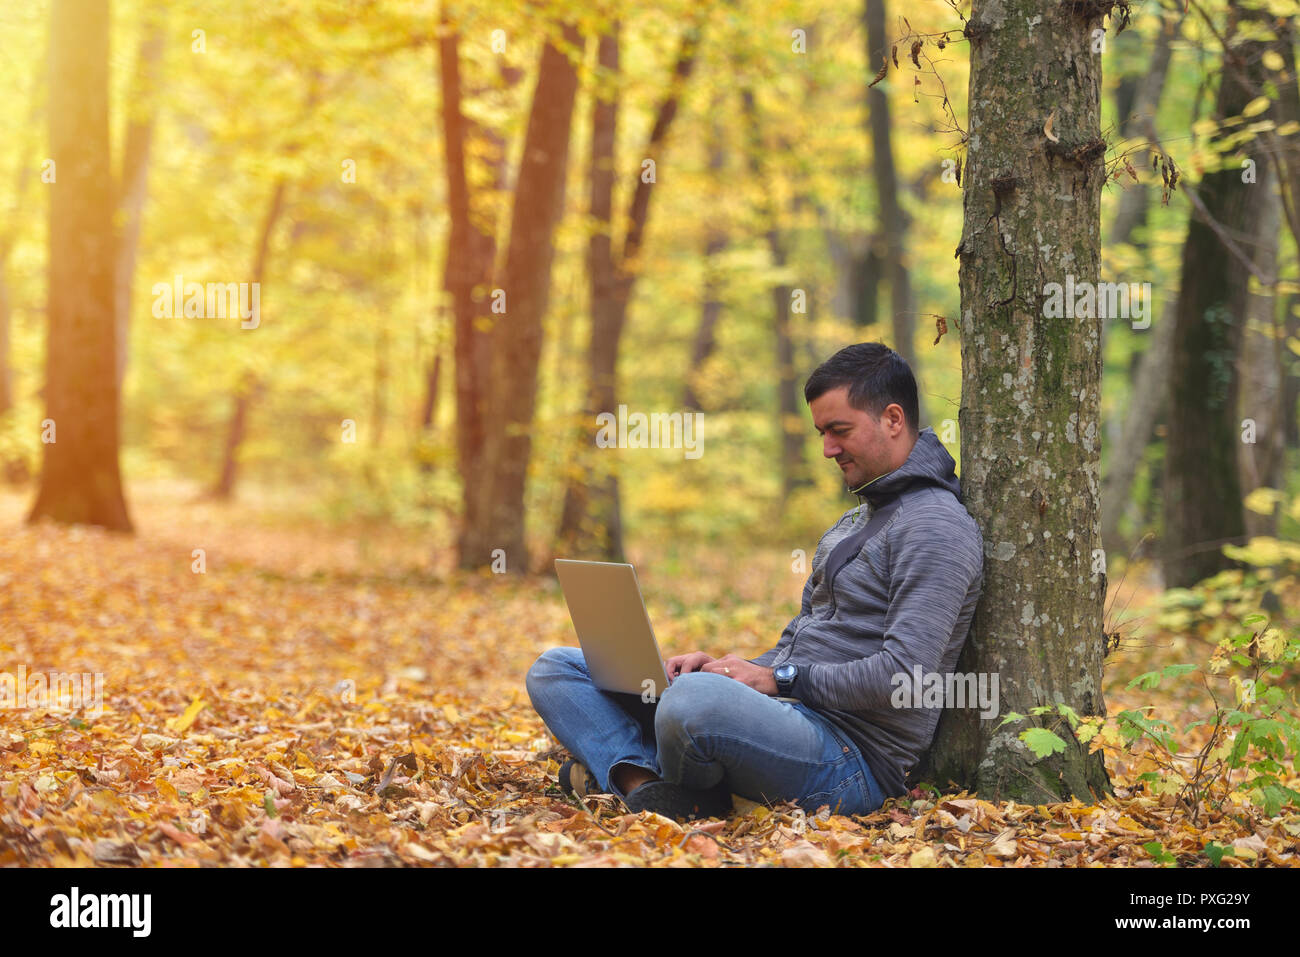 Man with laptop in forest, autumn colors, sunset warm light Stock Photo